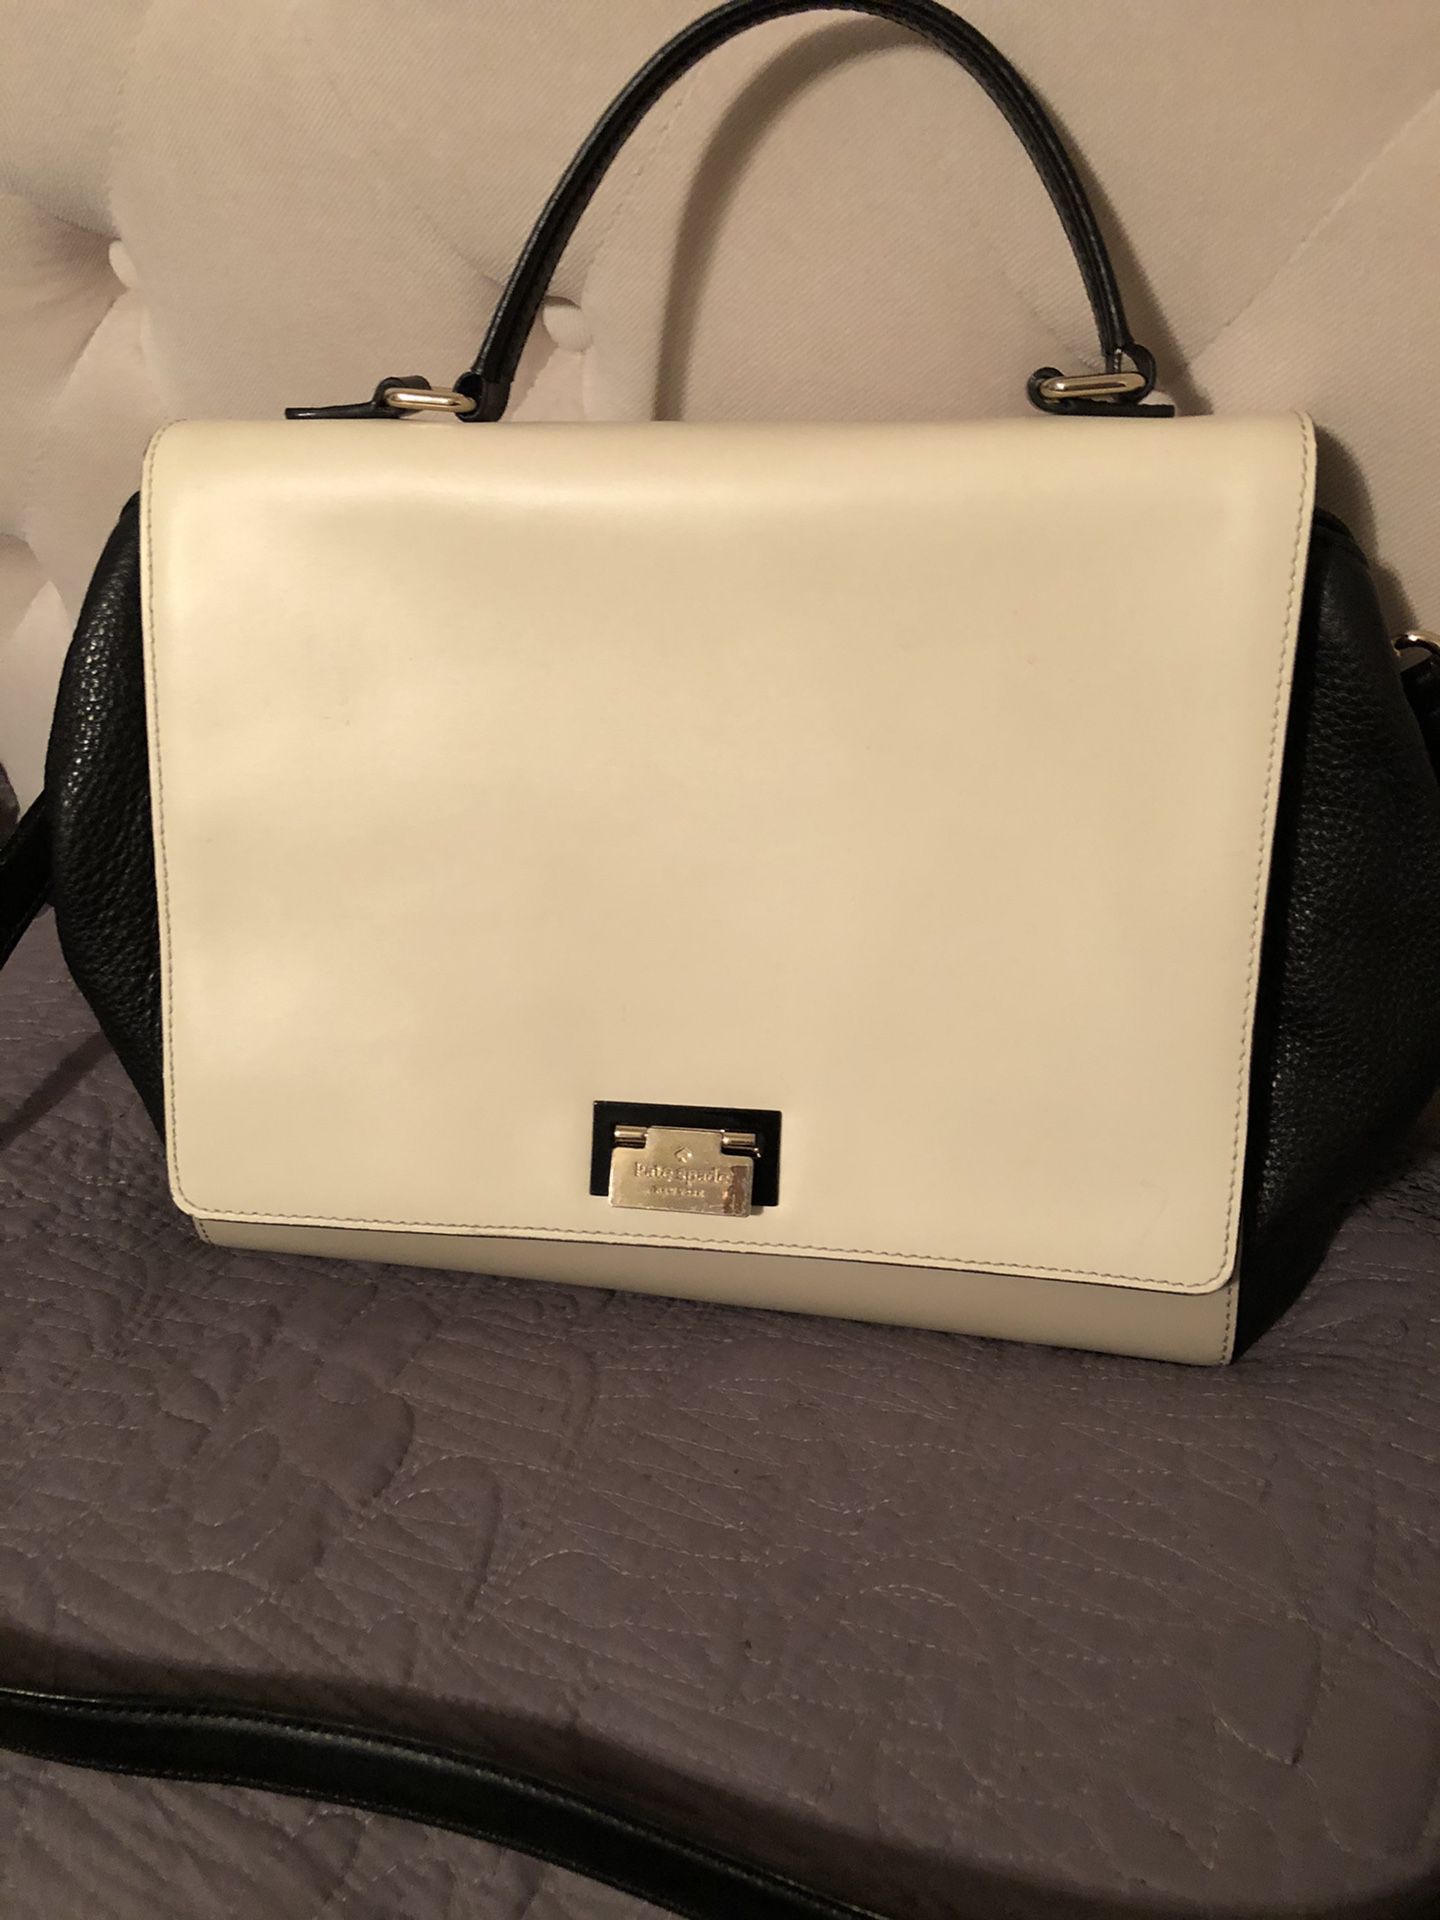 Kate Spade beautiful cream and black bag with long shoulder strap